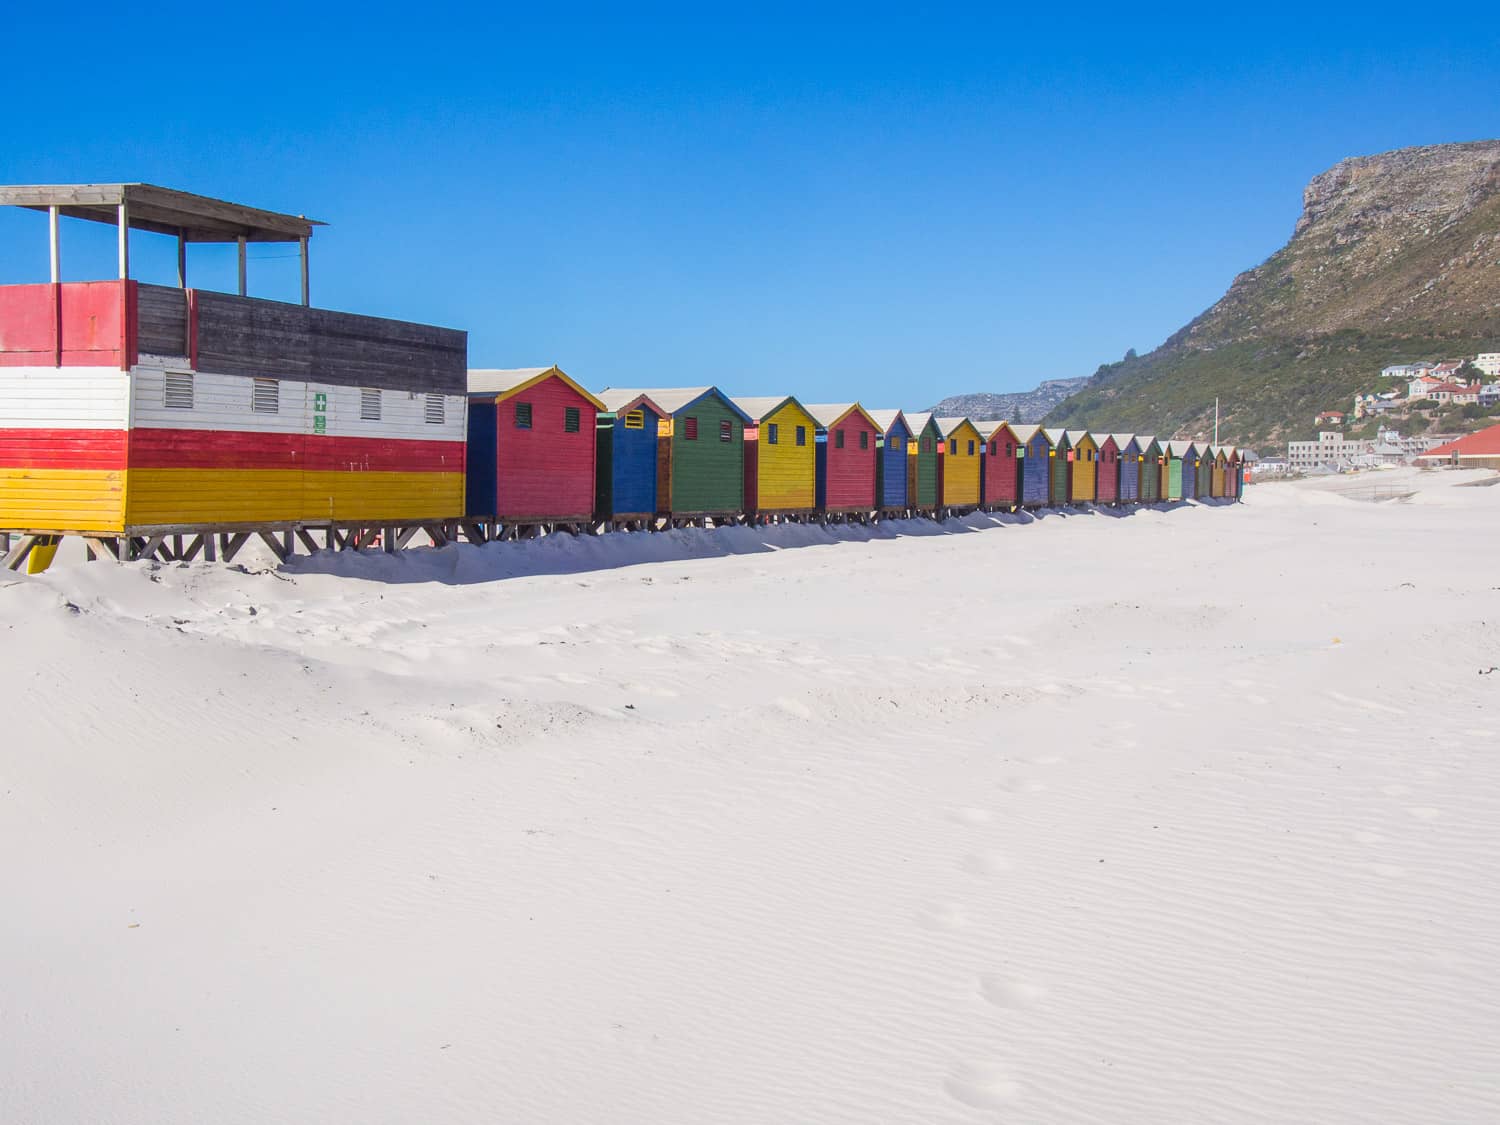 The colourful huts of Muizenberg beach on the Cape Peninsula